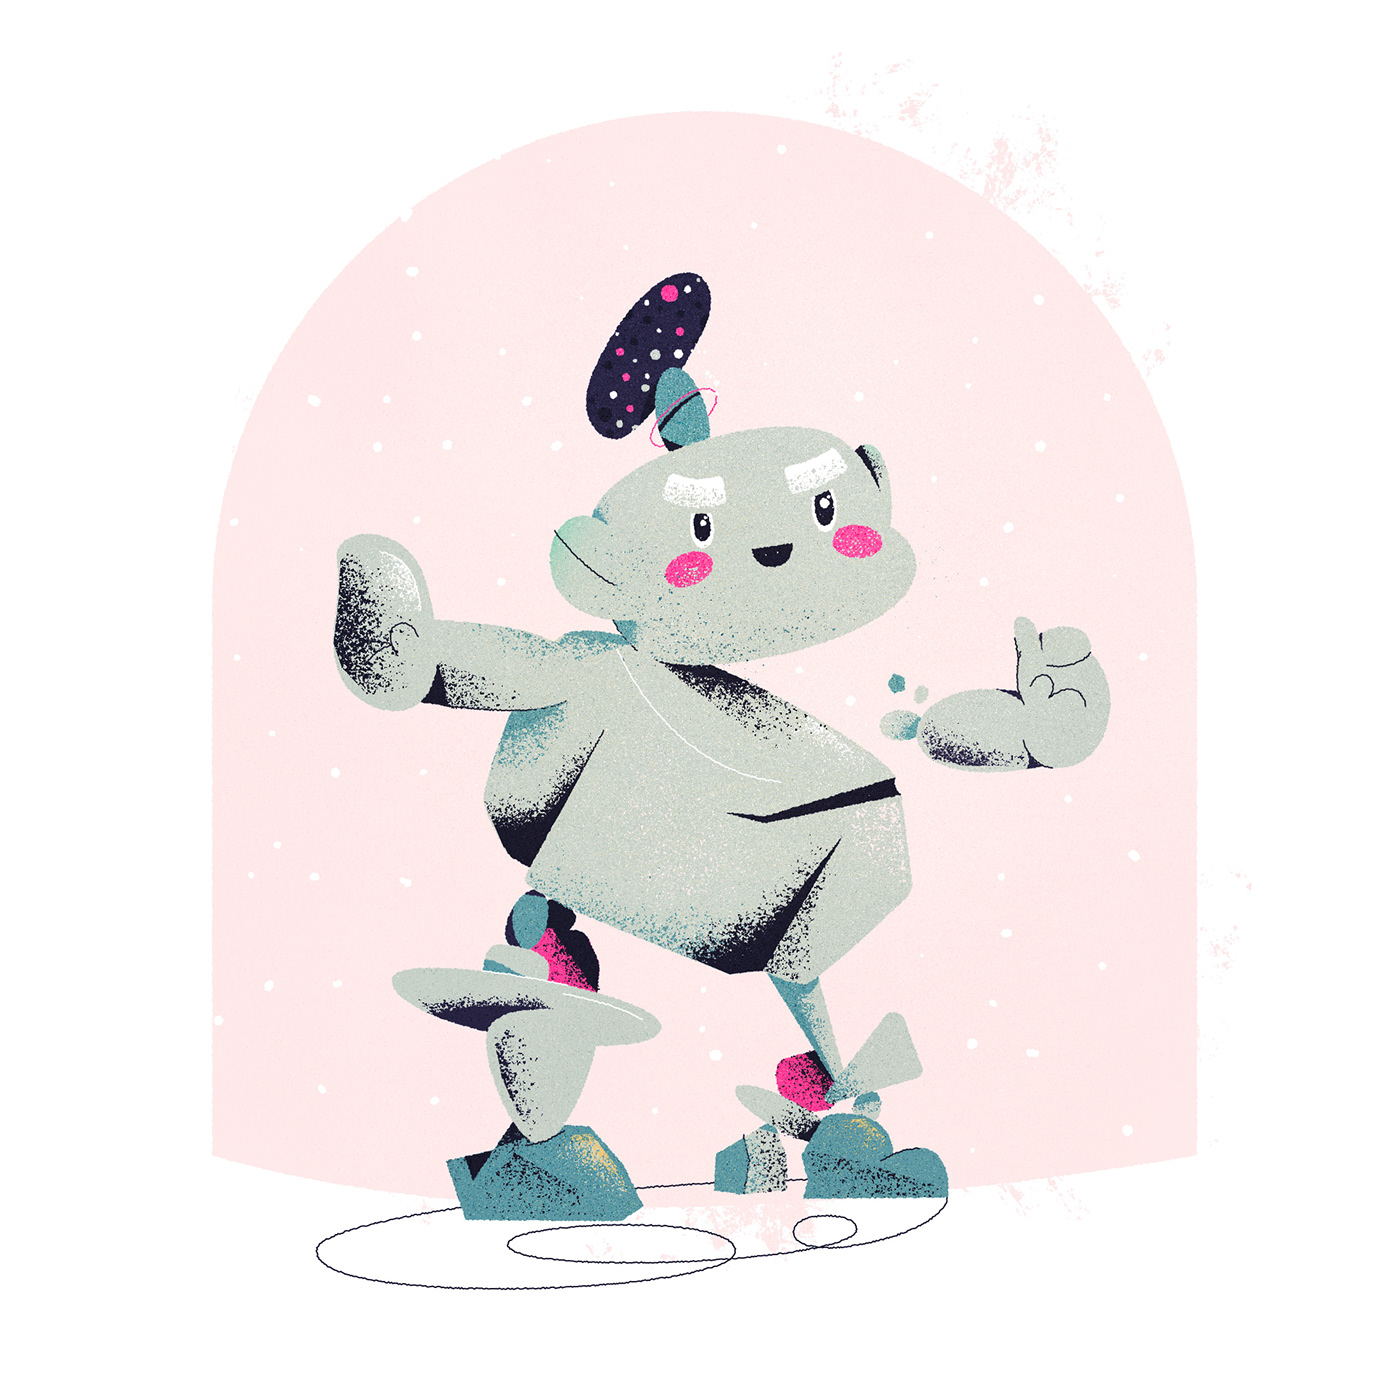 a cute character design of a stack of rocks dancing